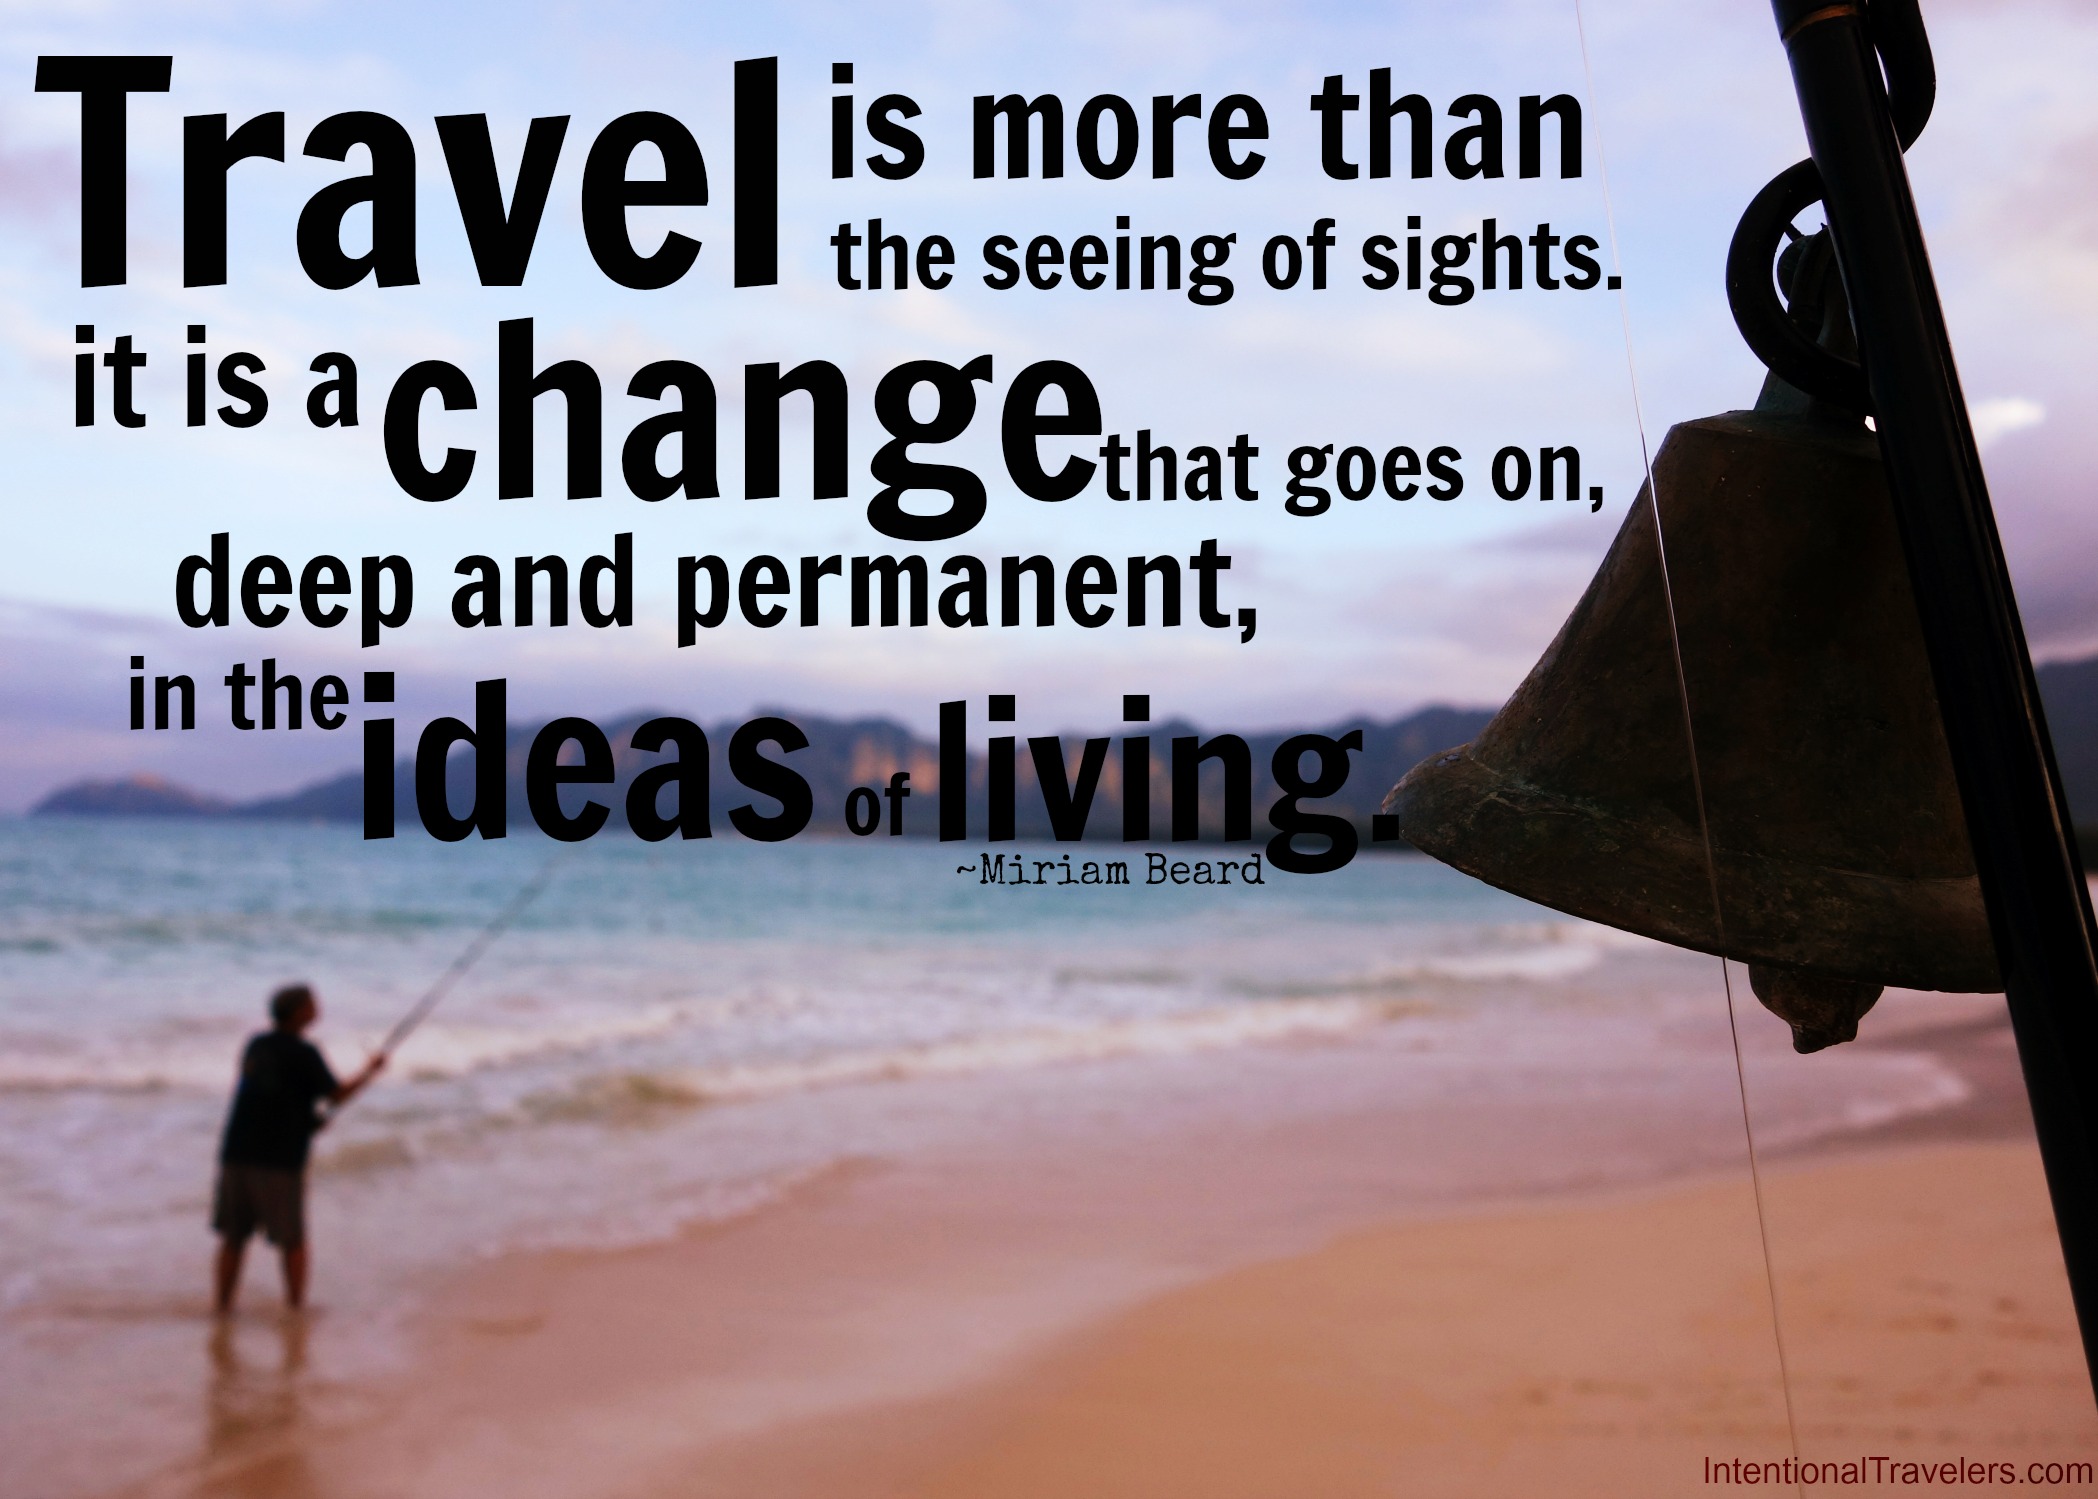 Travel Changes You